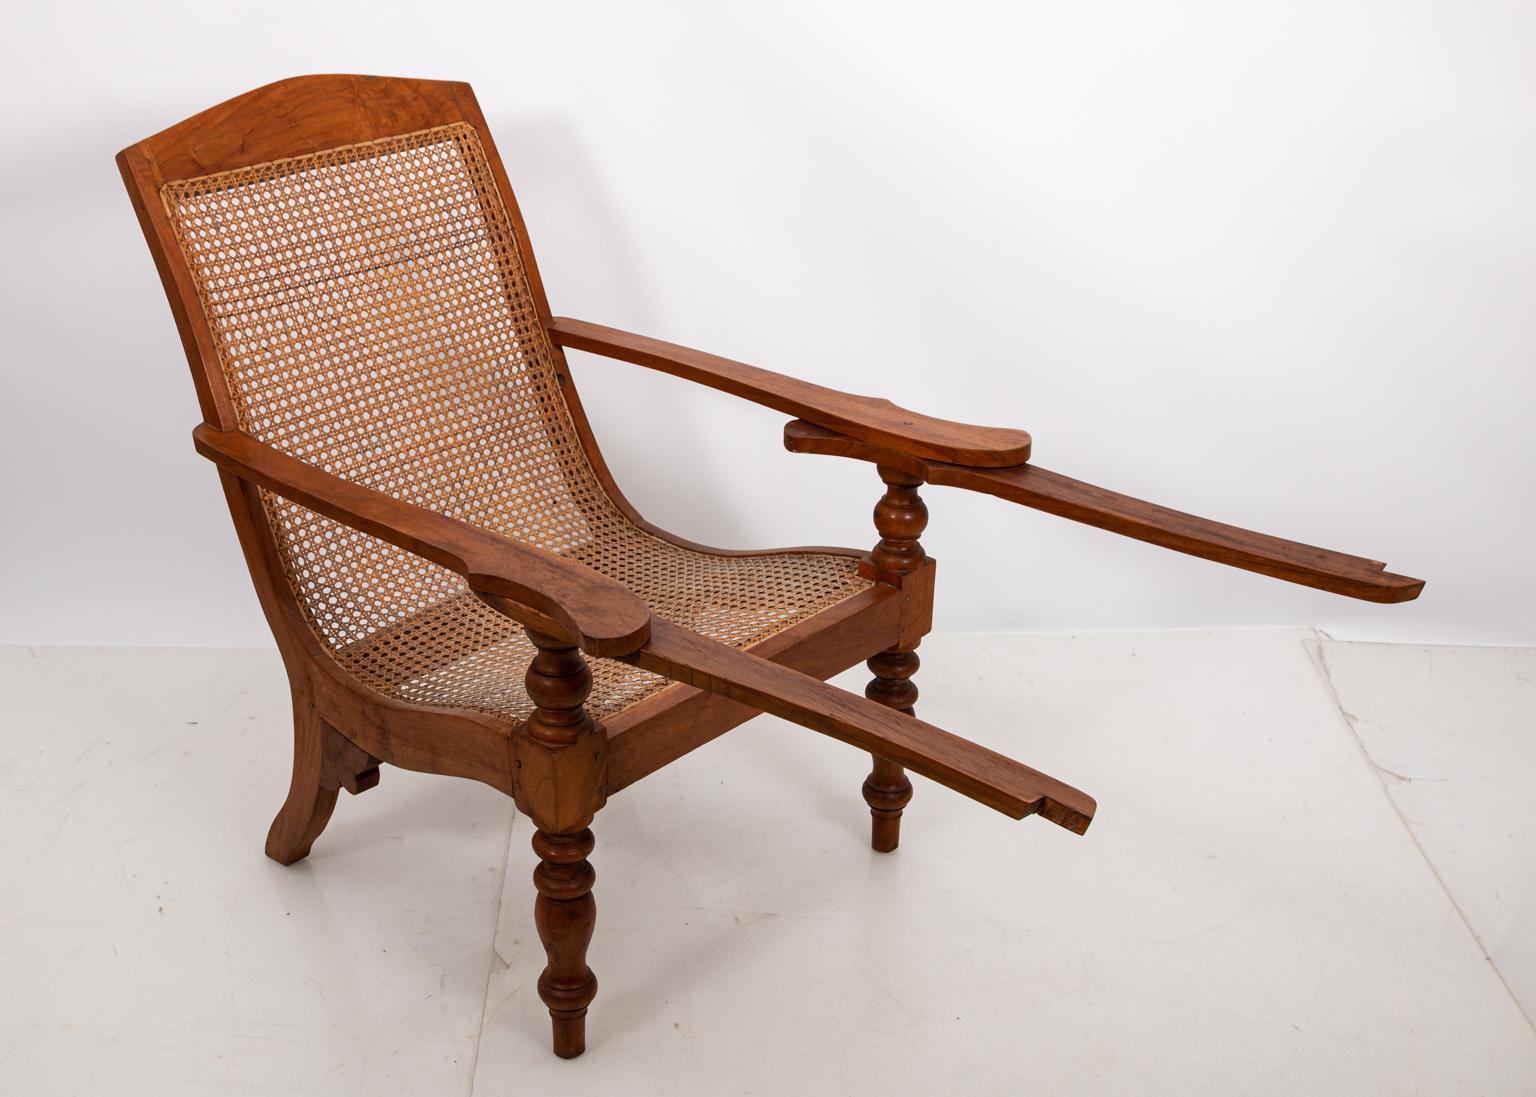 Anglo-Indian Teakwood and Cane Plantation Chair  1